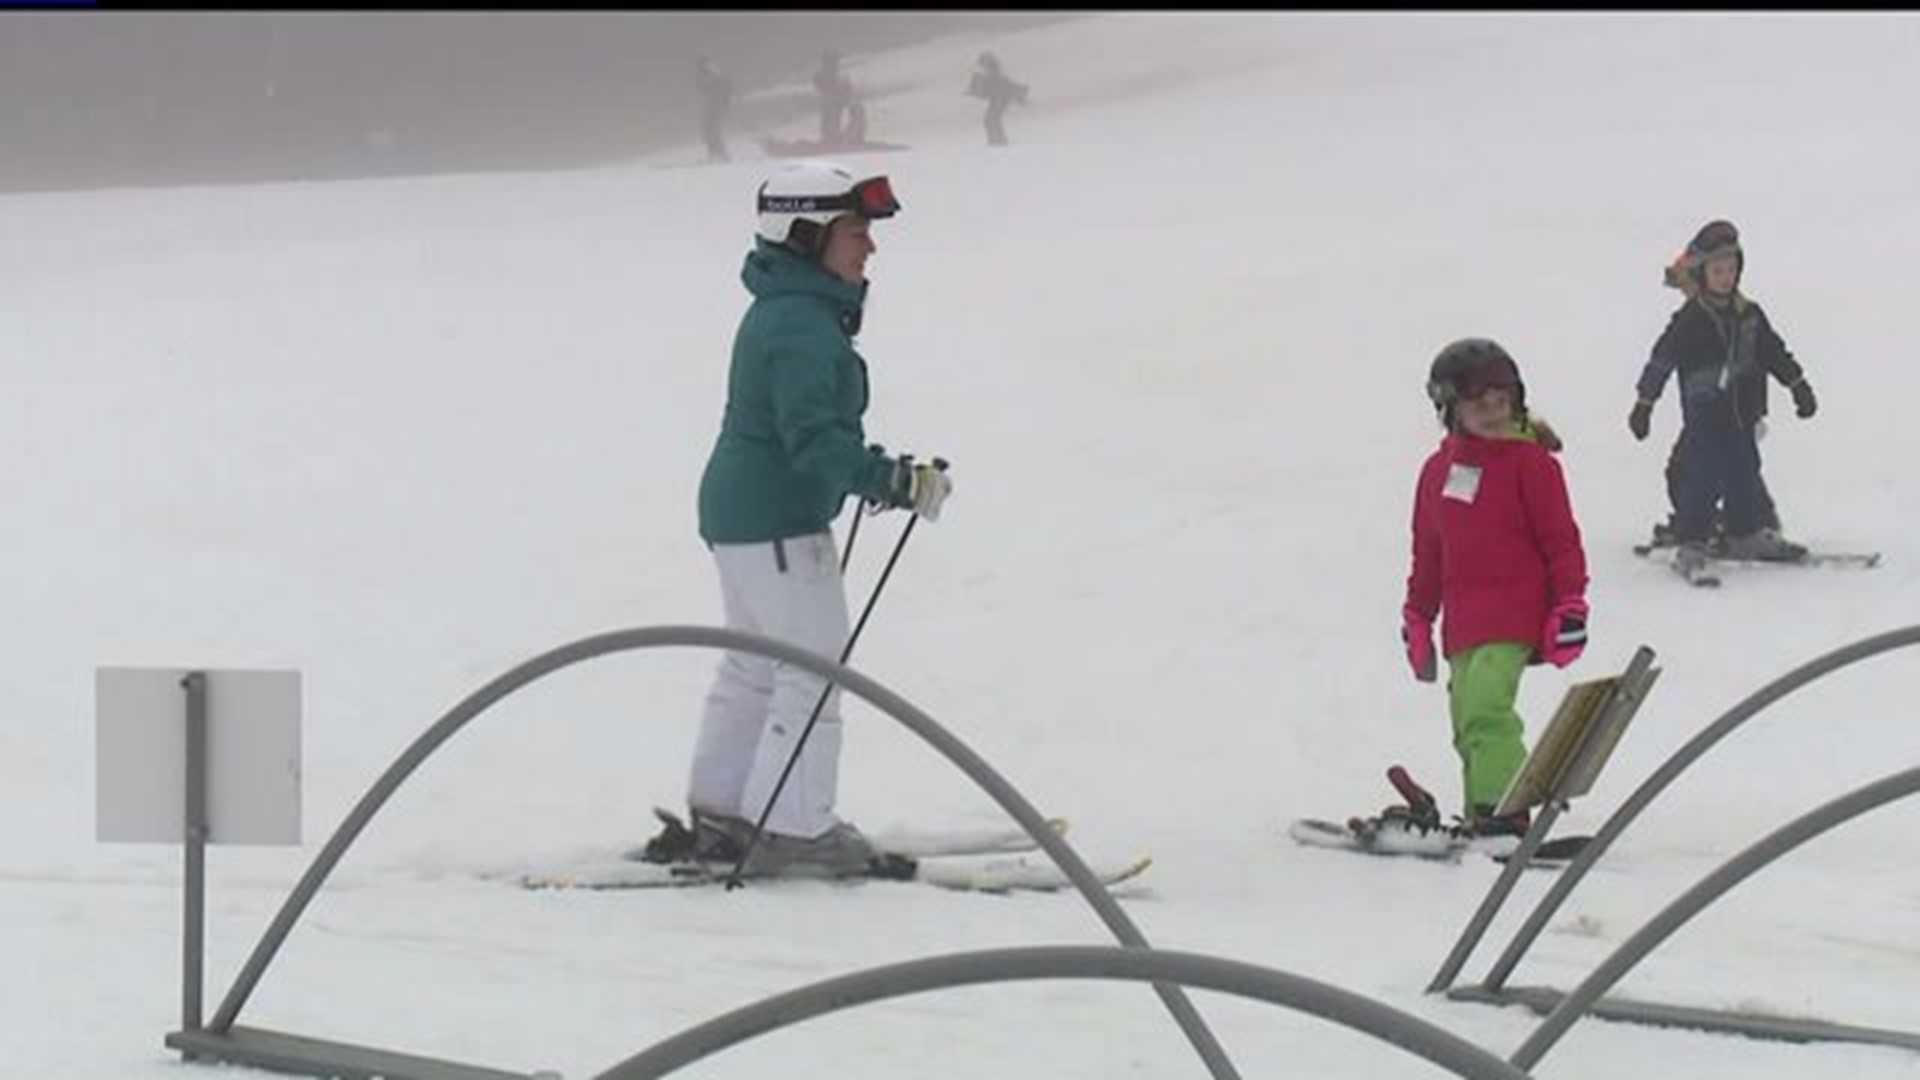 Warmer weather not stopping skiers from hitting the slopes in York Co